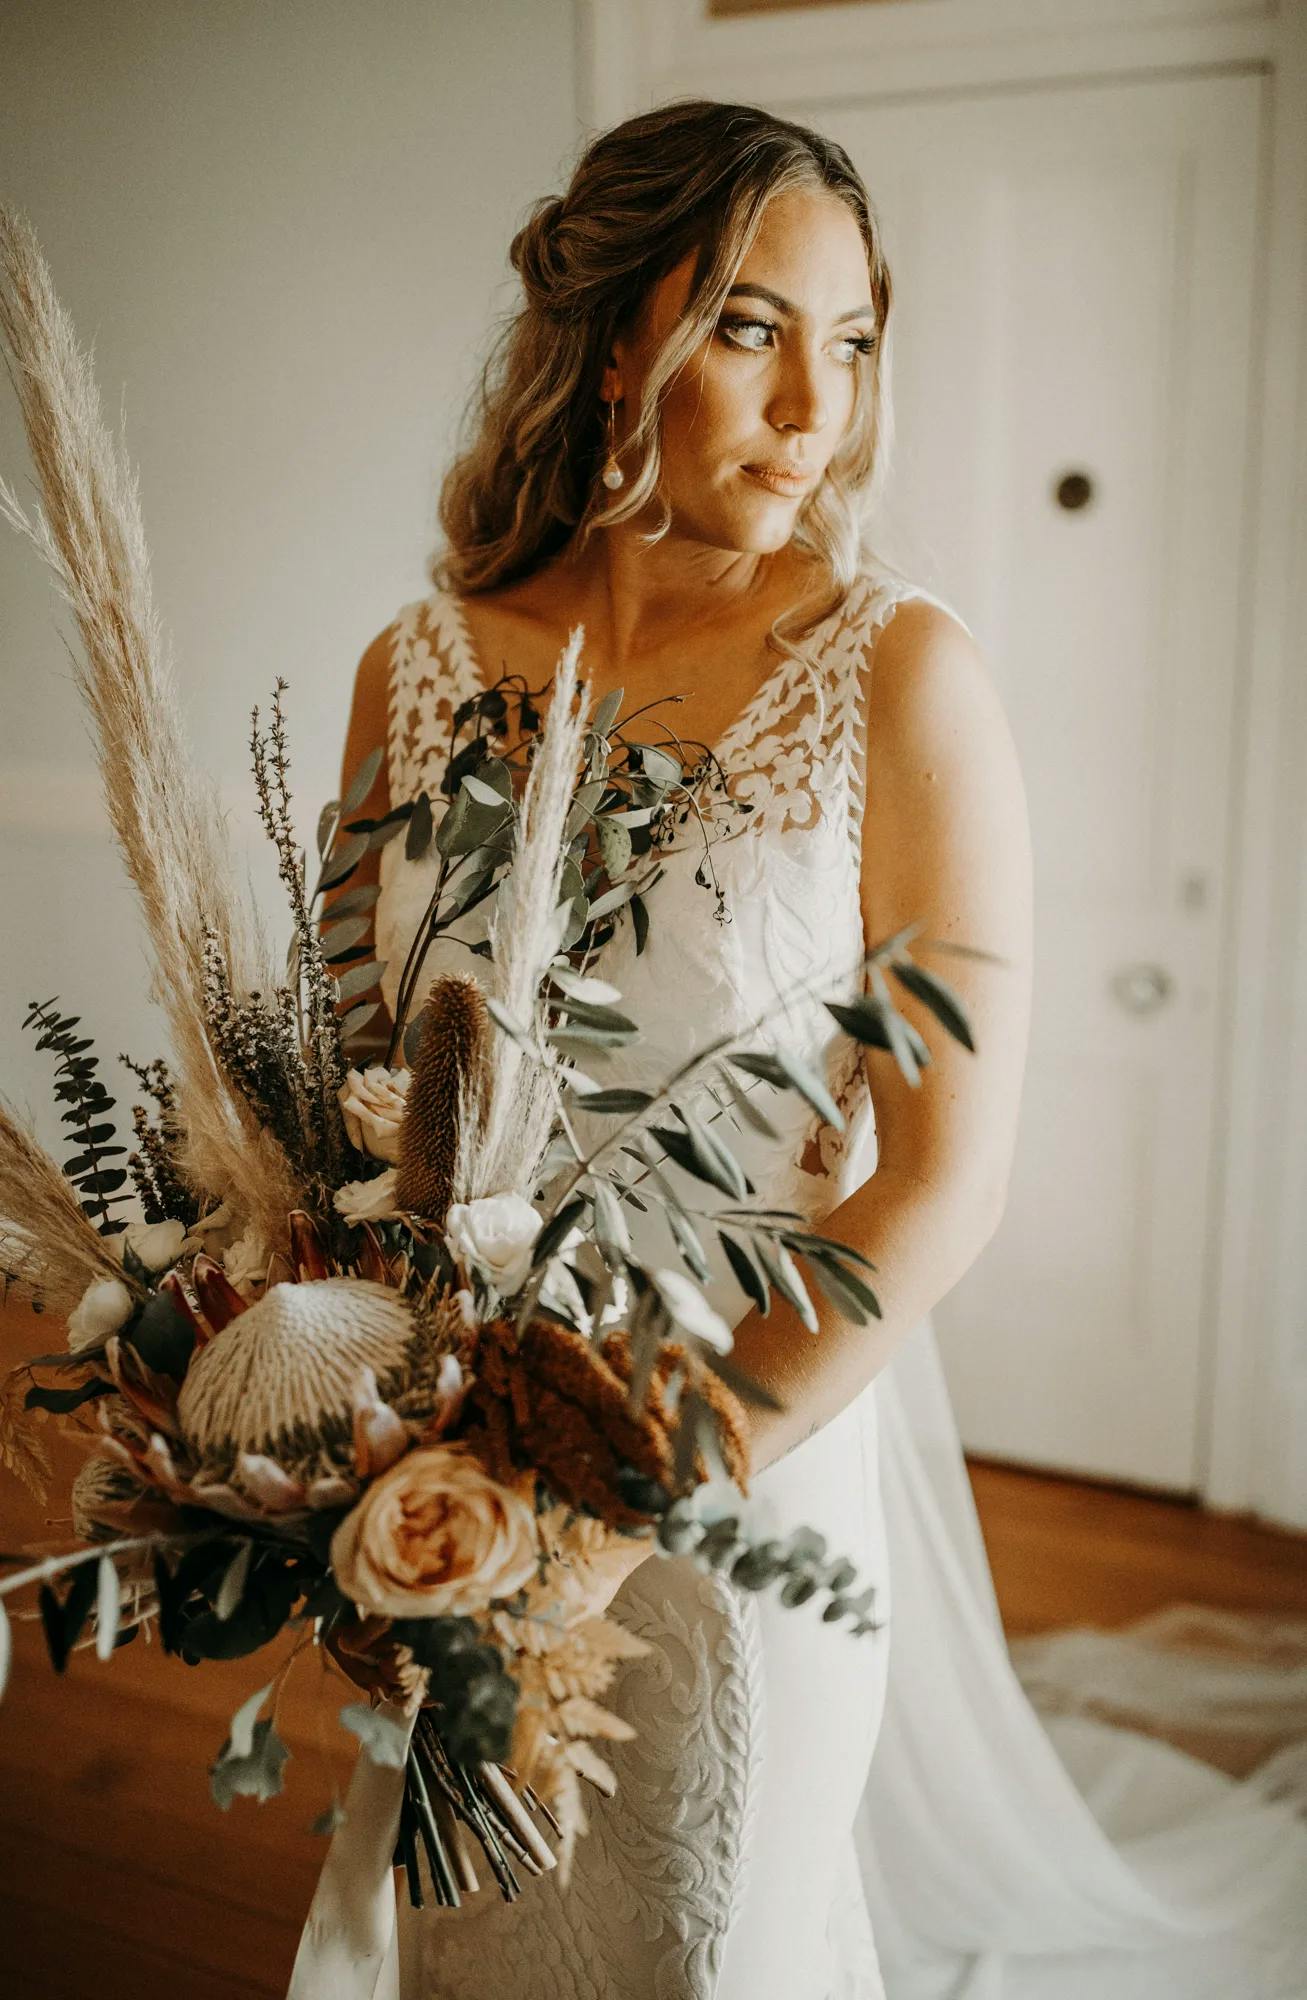 A bride in a lace wedding dress holds a bouquet made of neutral-toned flowers, greenery, and dried elements. She gazes thoughtfully to the side, with soft lighting highlighting her serene expression and the intricate details of her gown and bouquet.